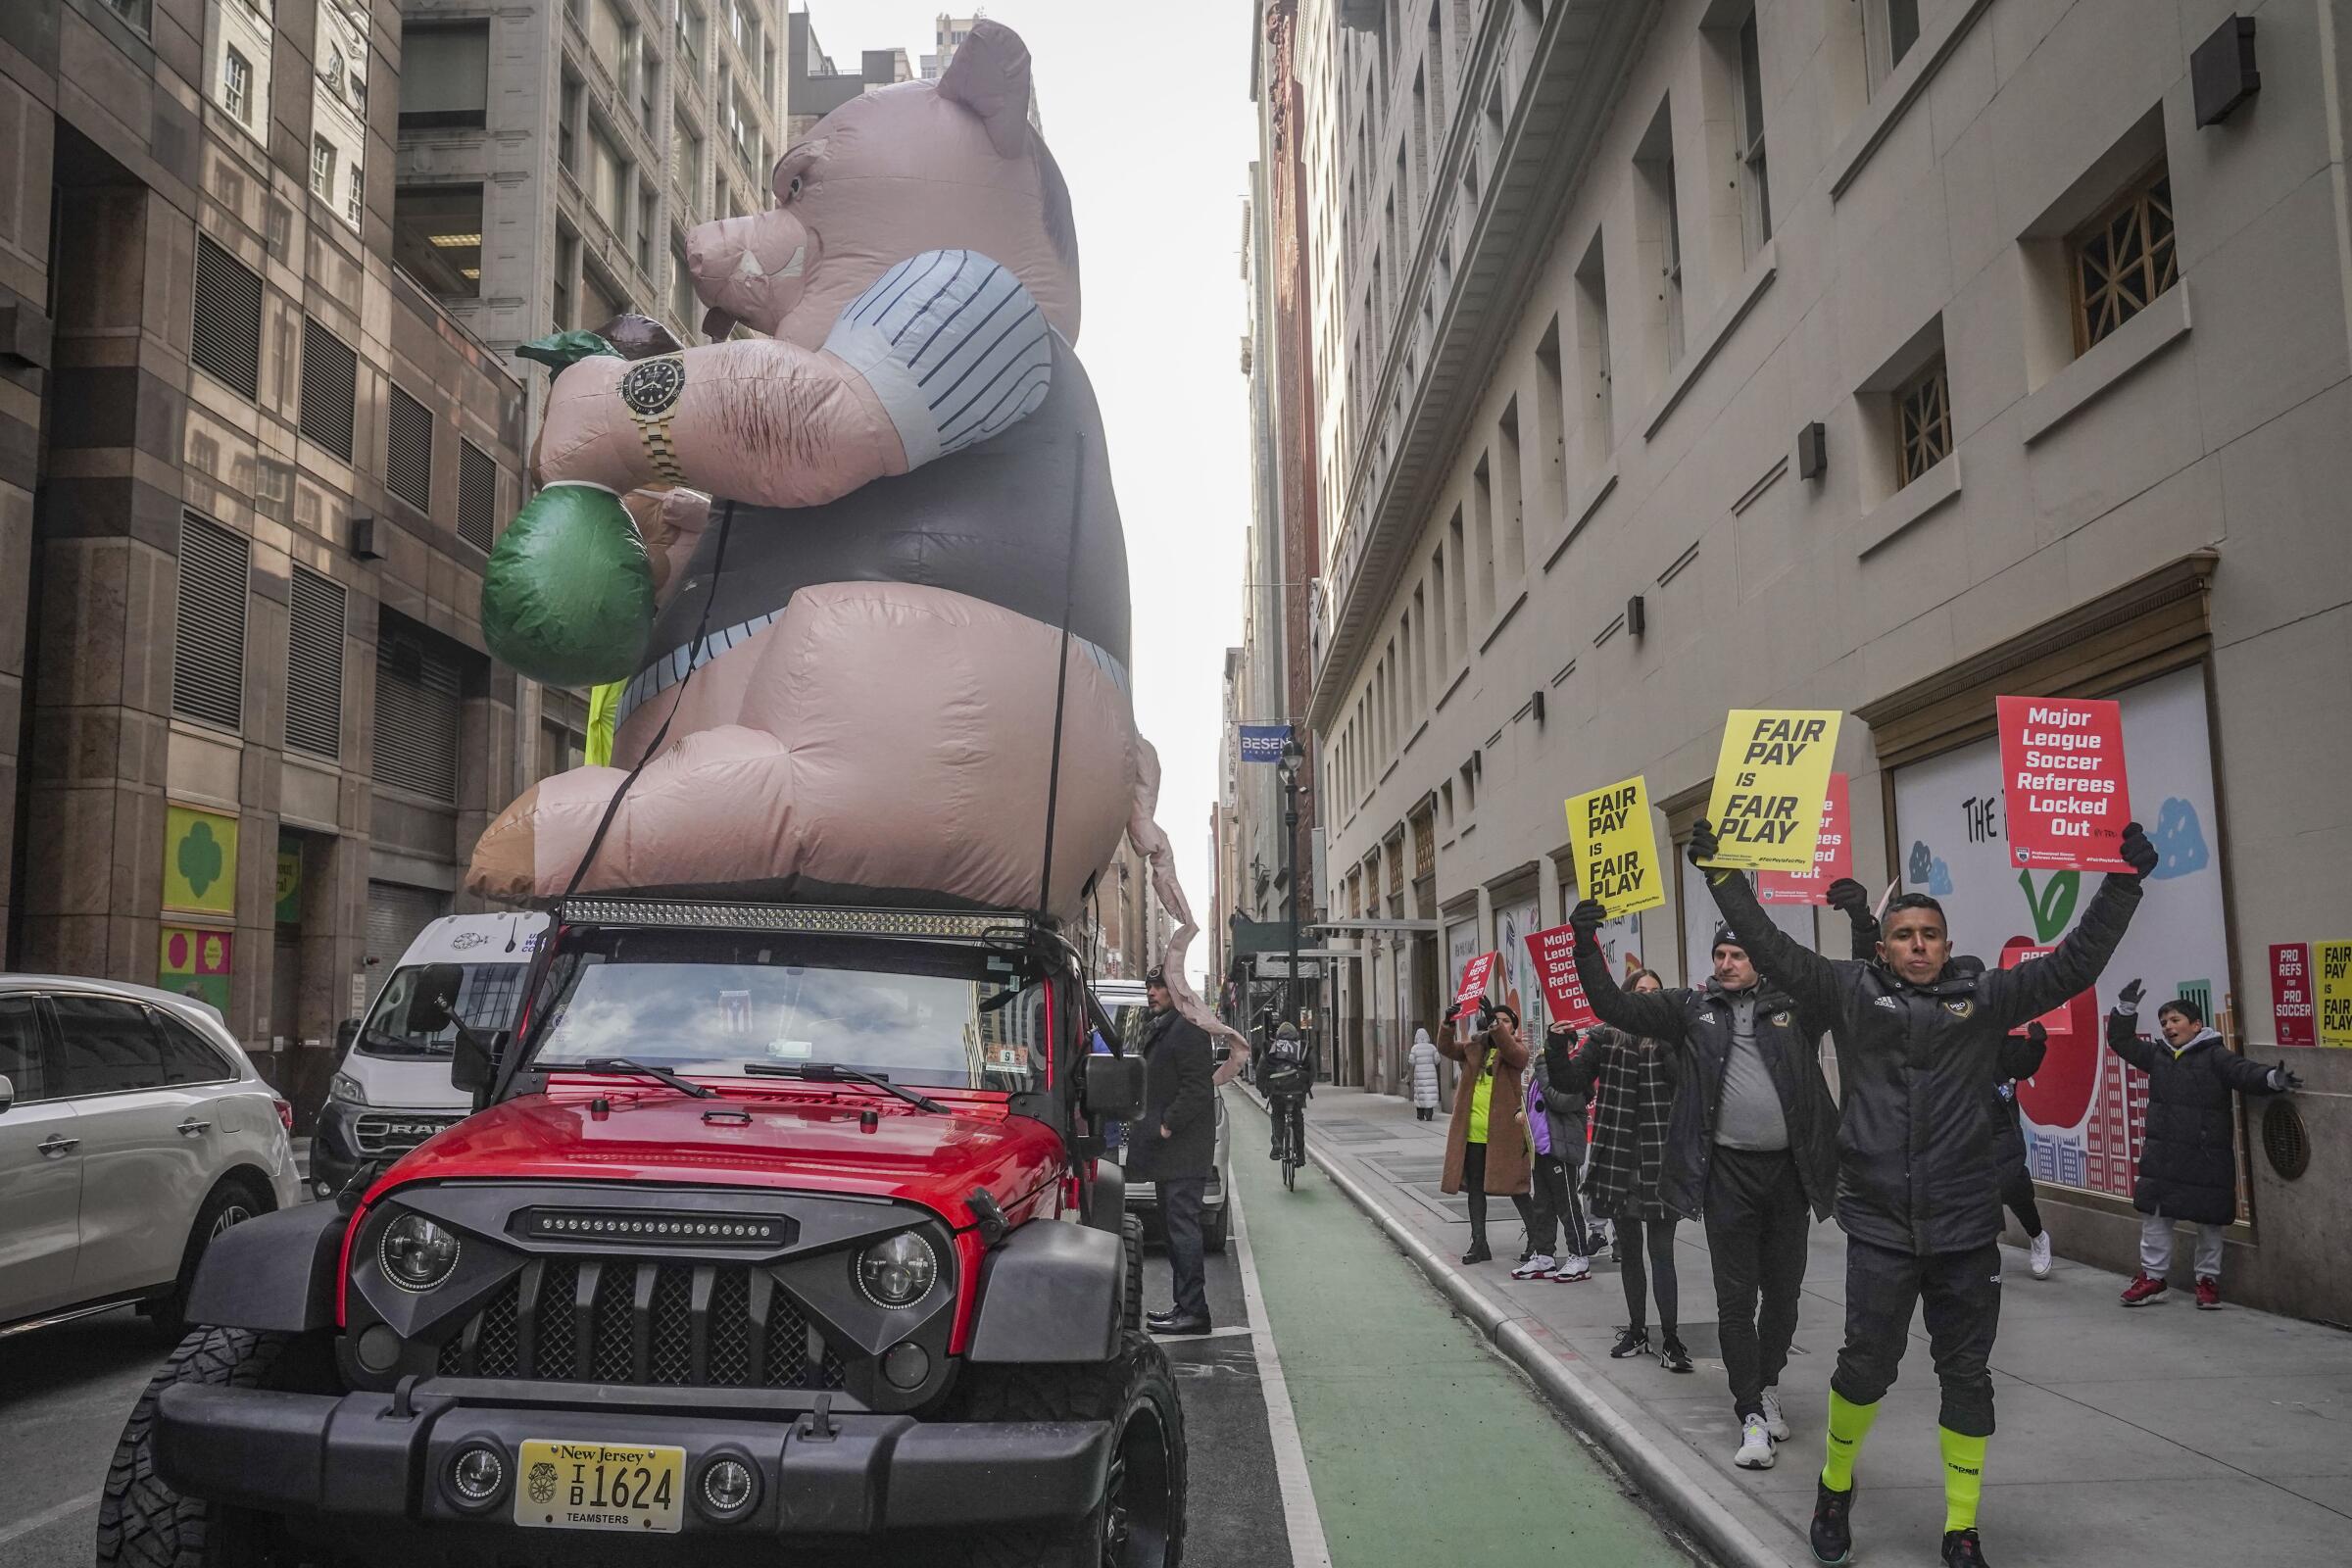 MLS referees and supporters picket outside MLS headquarters in New York around a "Greedy Pig" balloon on Feb. 21.